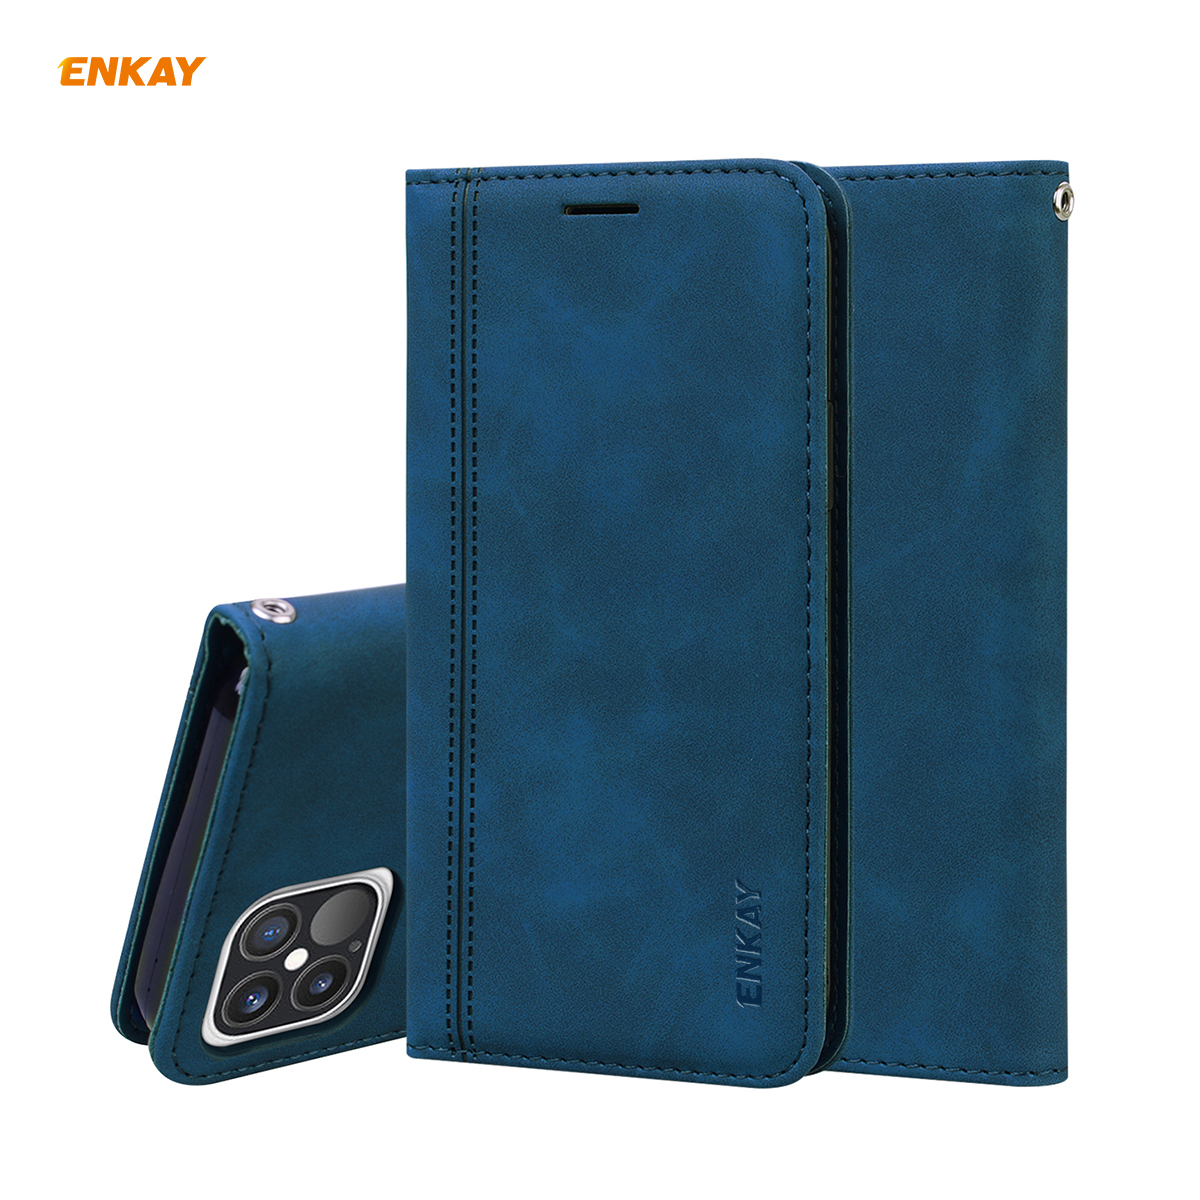 Enkay-for-iPhone-12-Pro-Max-Case-Business-Magnetic-Flip-with-Card-Slot-Stand-PU-Leather--TPU-Full-Co-1755830-10